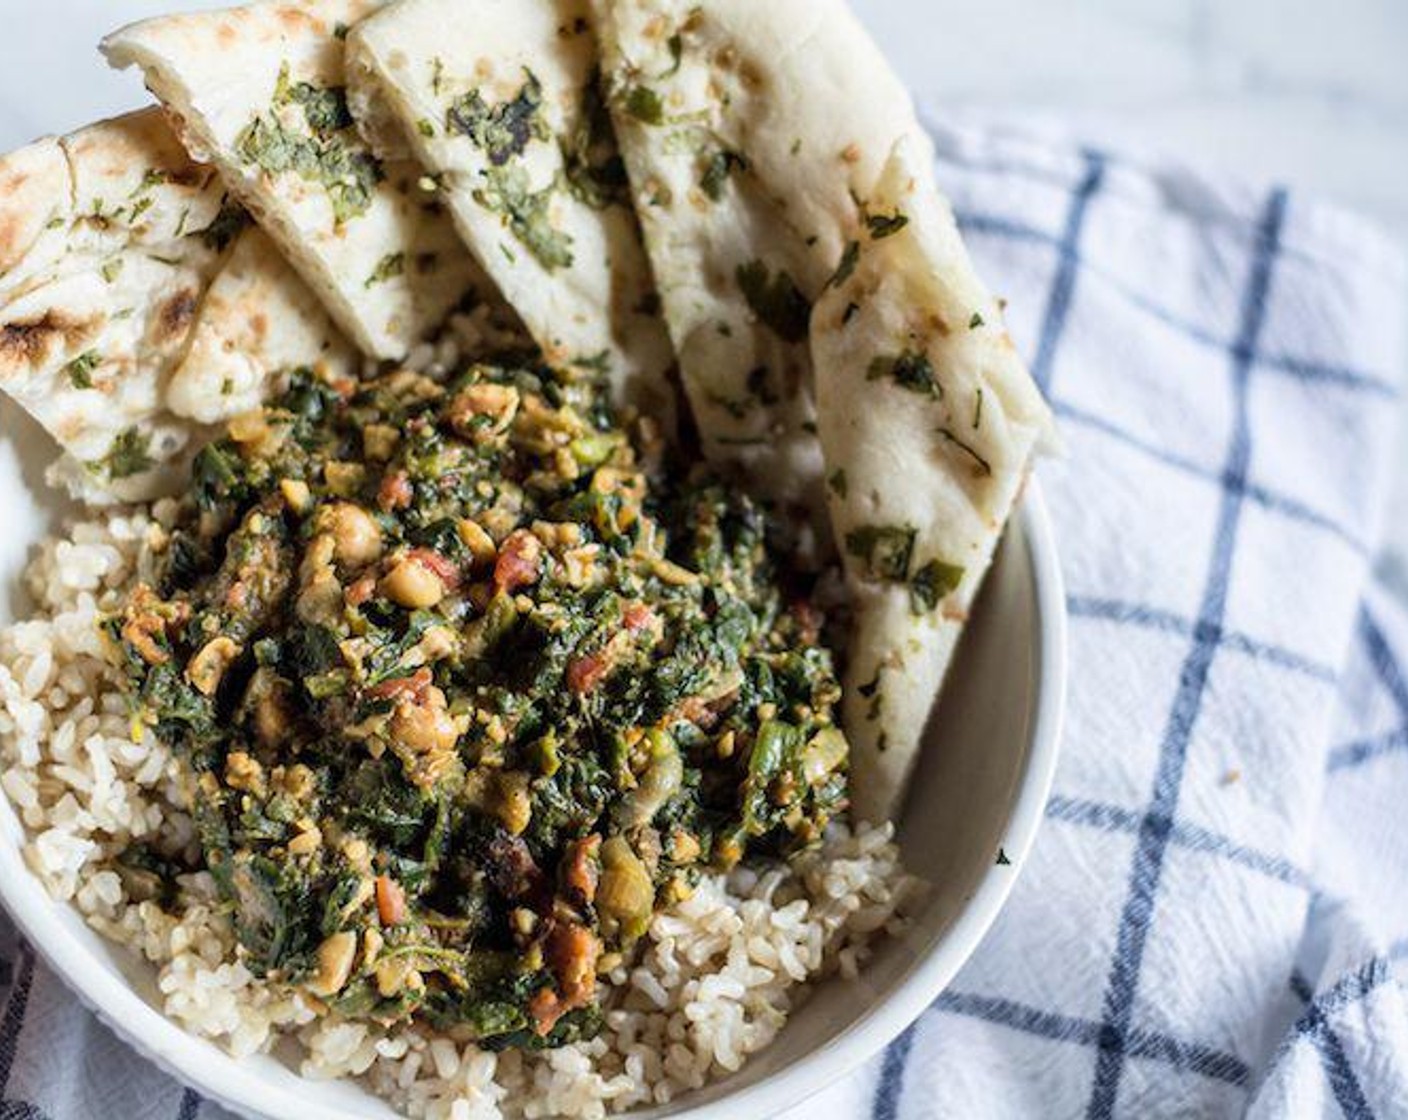 Spinach Masala with Brown Rice and Naan Bread